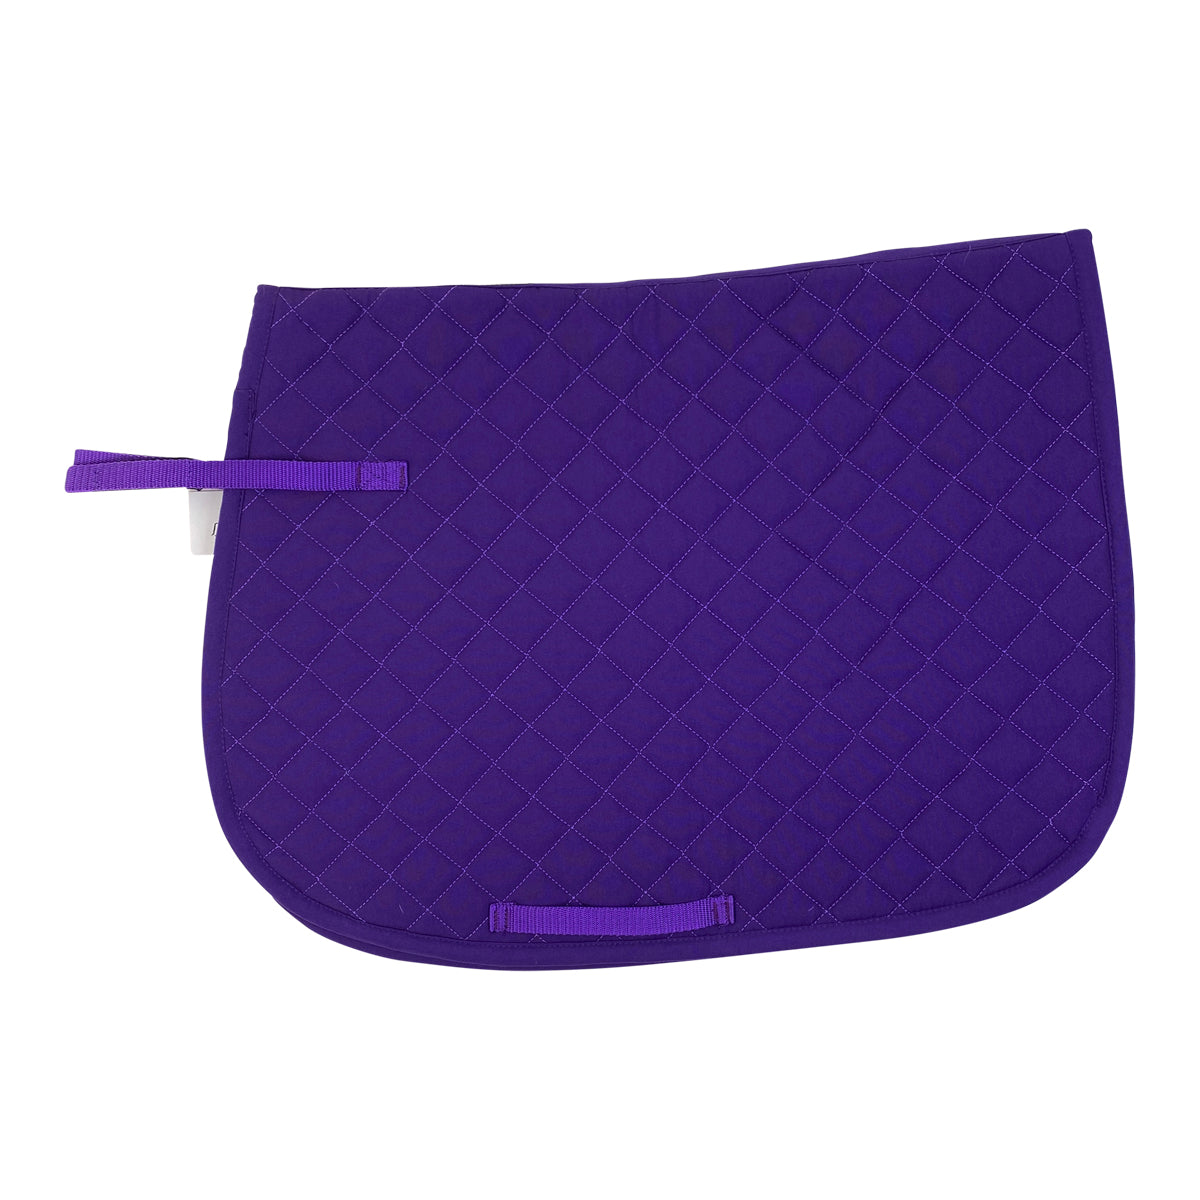 Dover Saddlery Quilted AP Pad in Purple